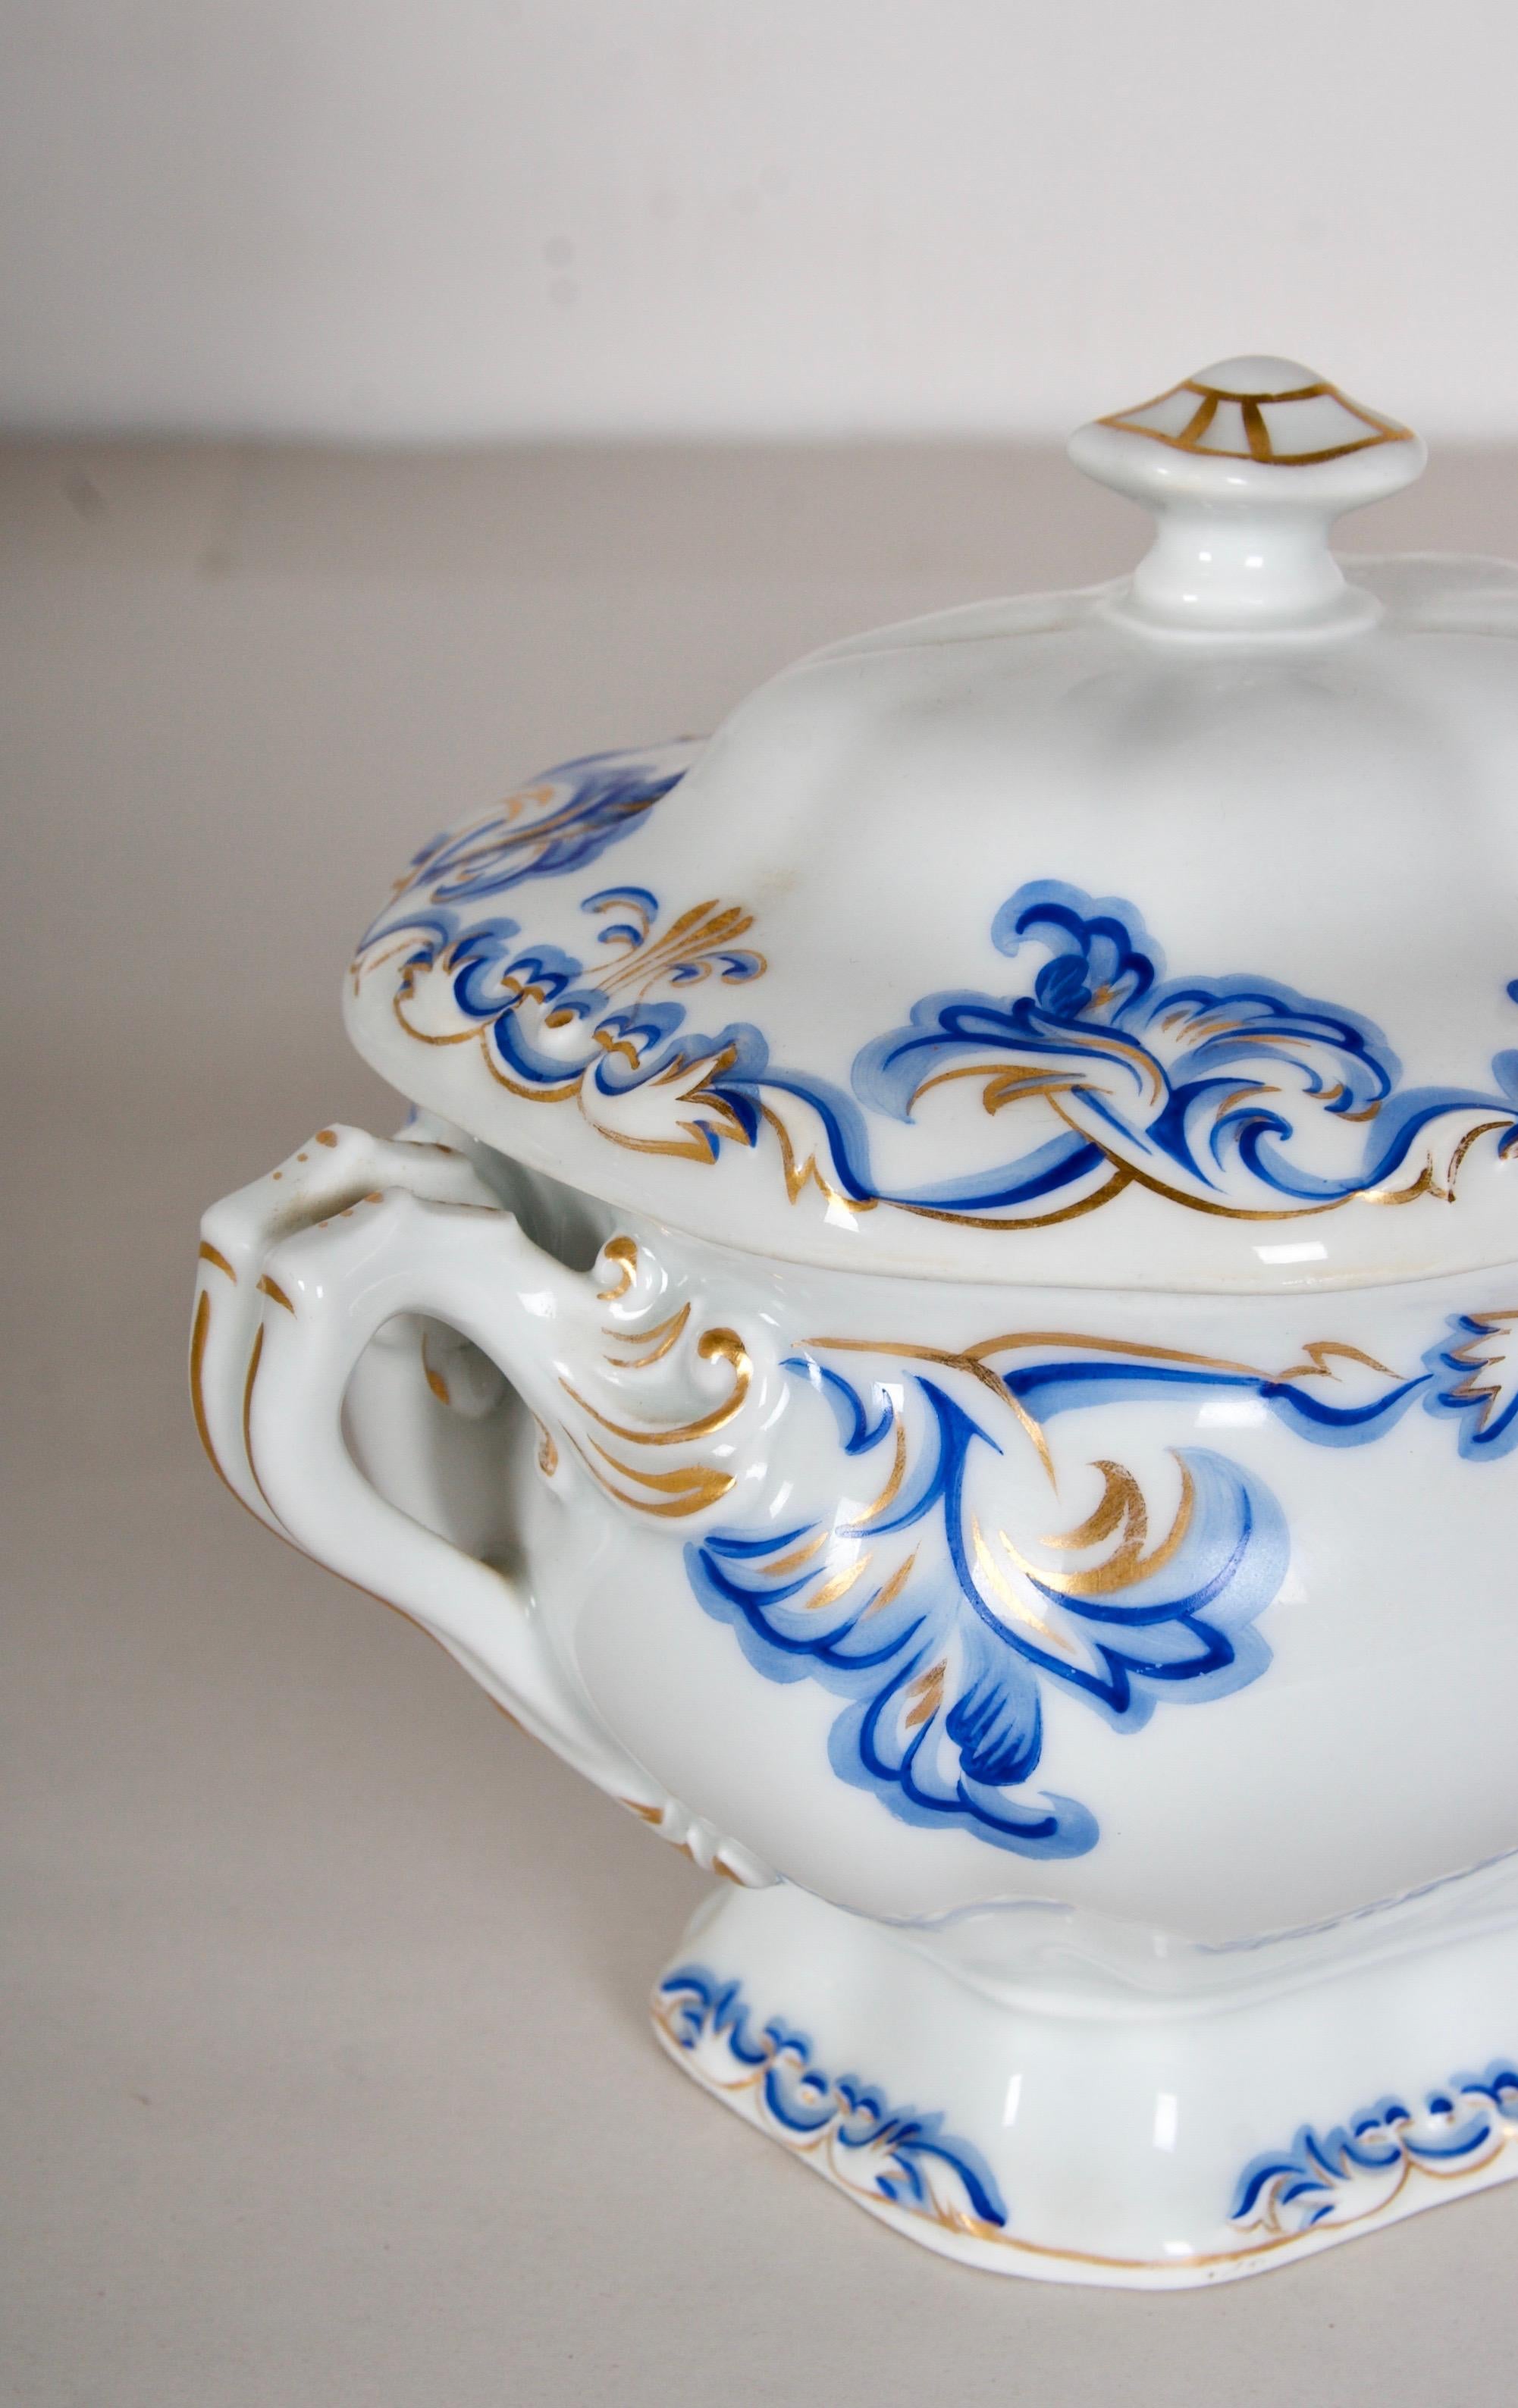 1851 Imperial Vienna Porcelain 27 piece Service for 18, very rare In Good Condition For Sale In San Francisco, CA